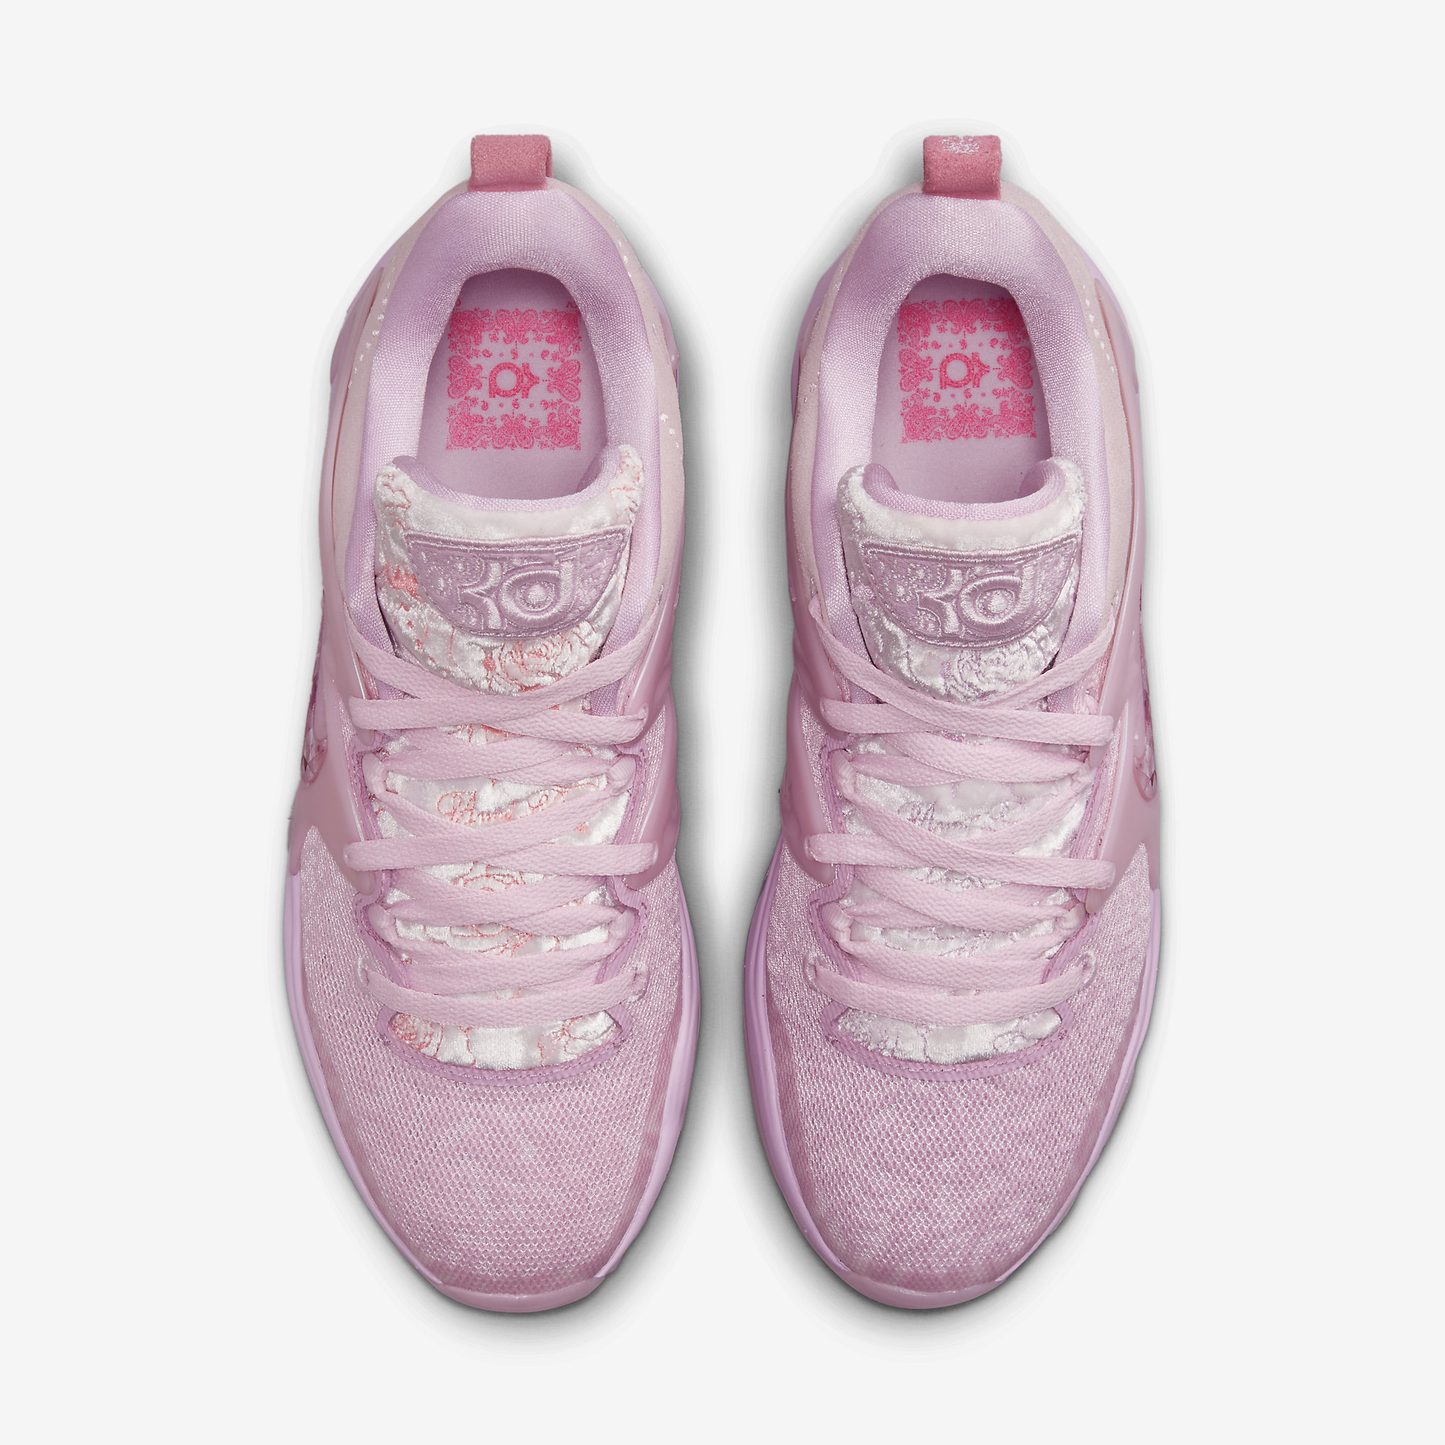 KD 15 Aunt Pearl